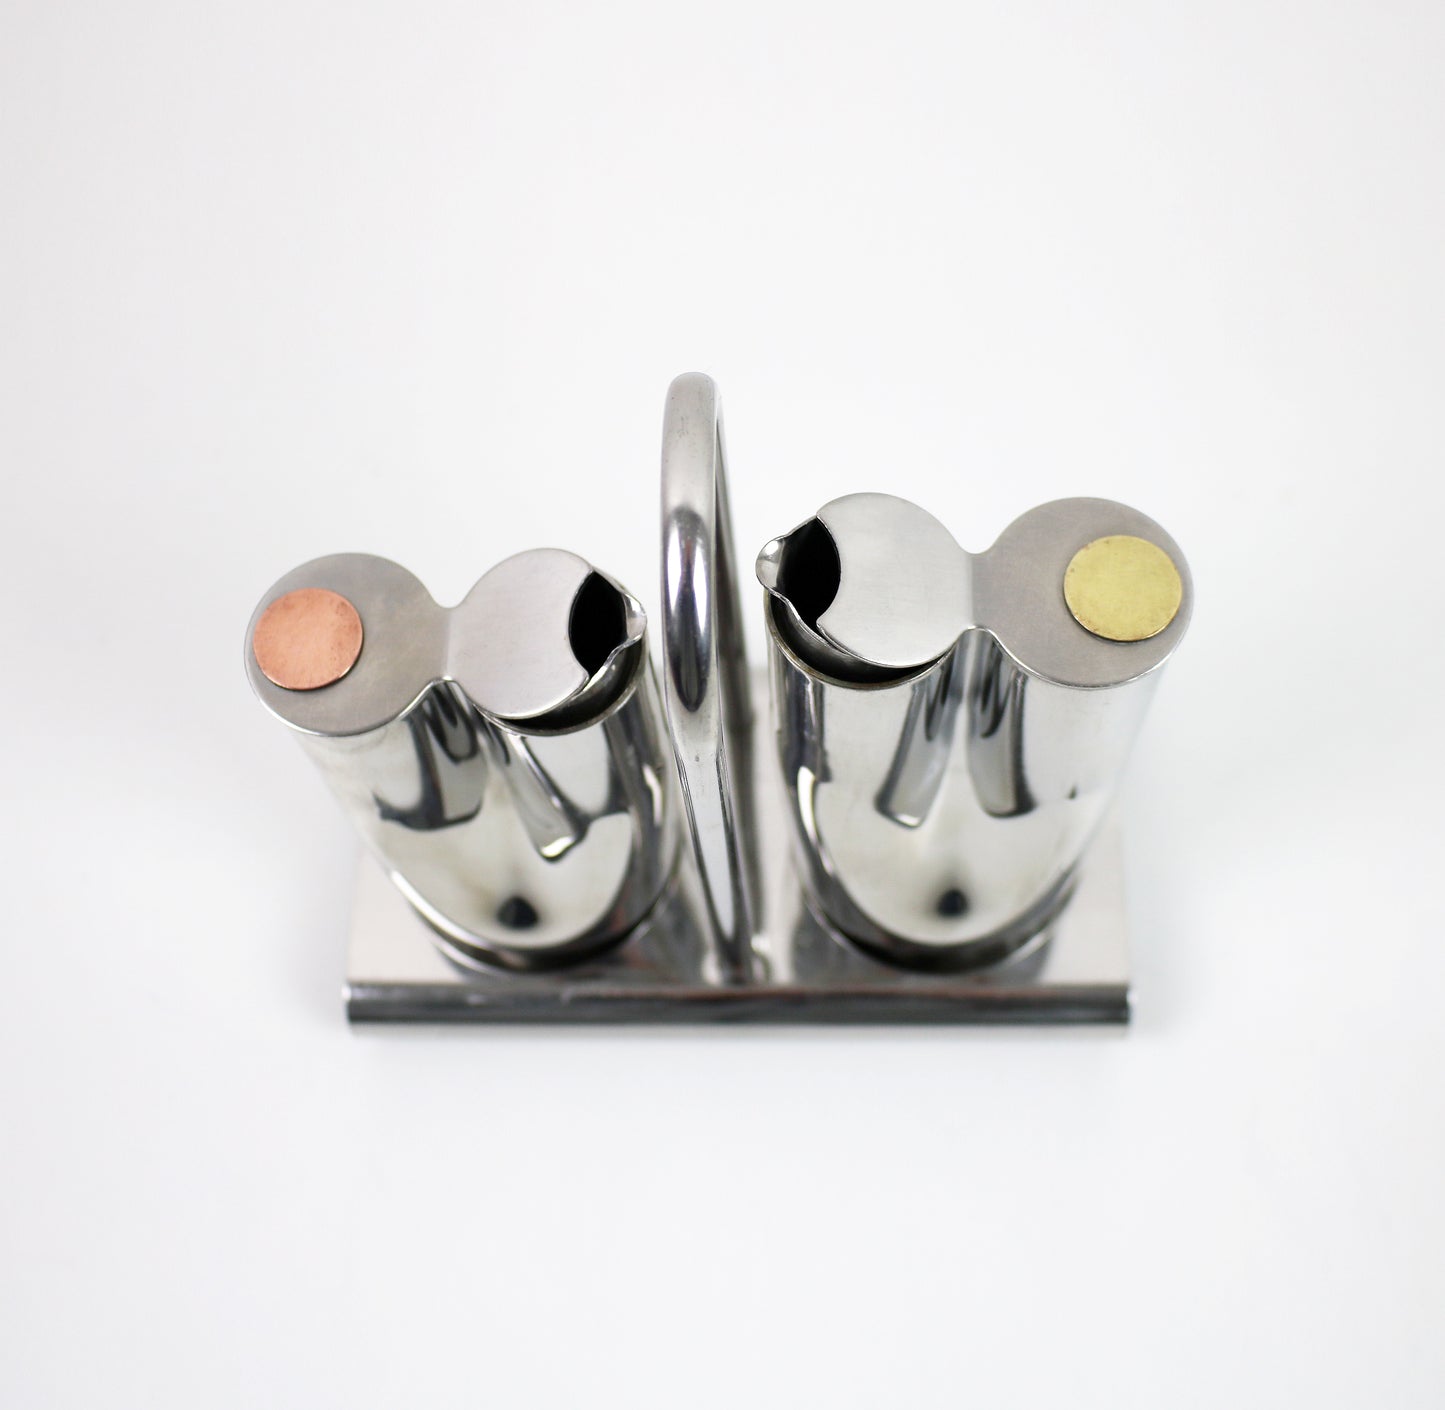 Vintage Italian dressing cruet set in stainless steel, brass and copper by Stella